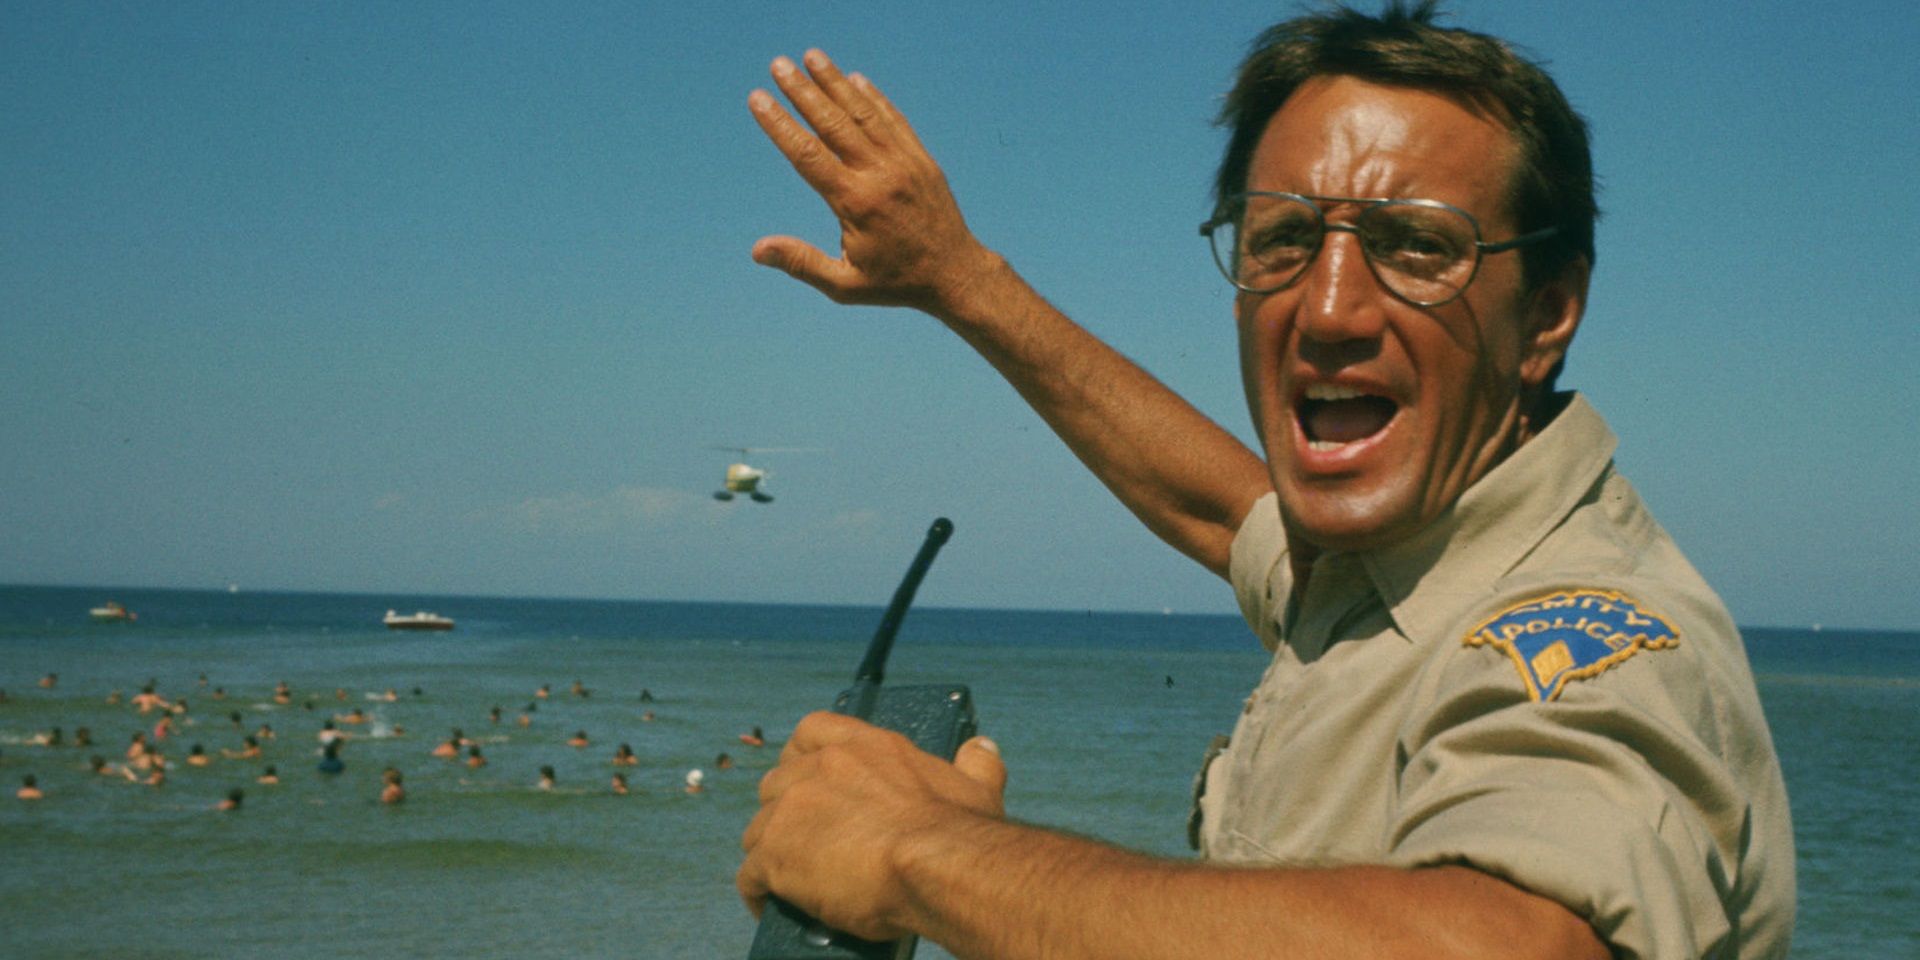 Chief Brody in Jaws